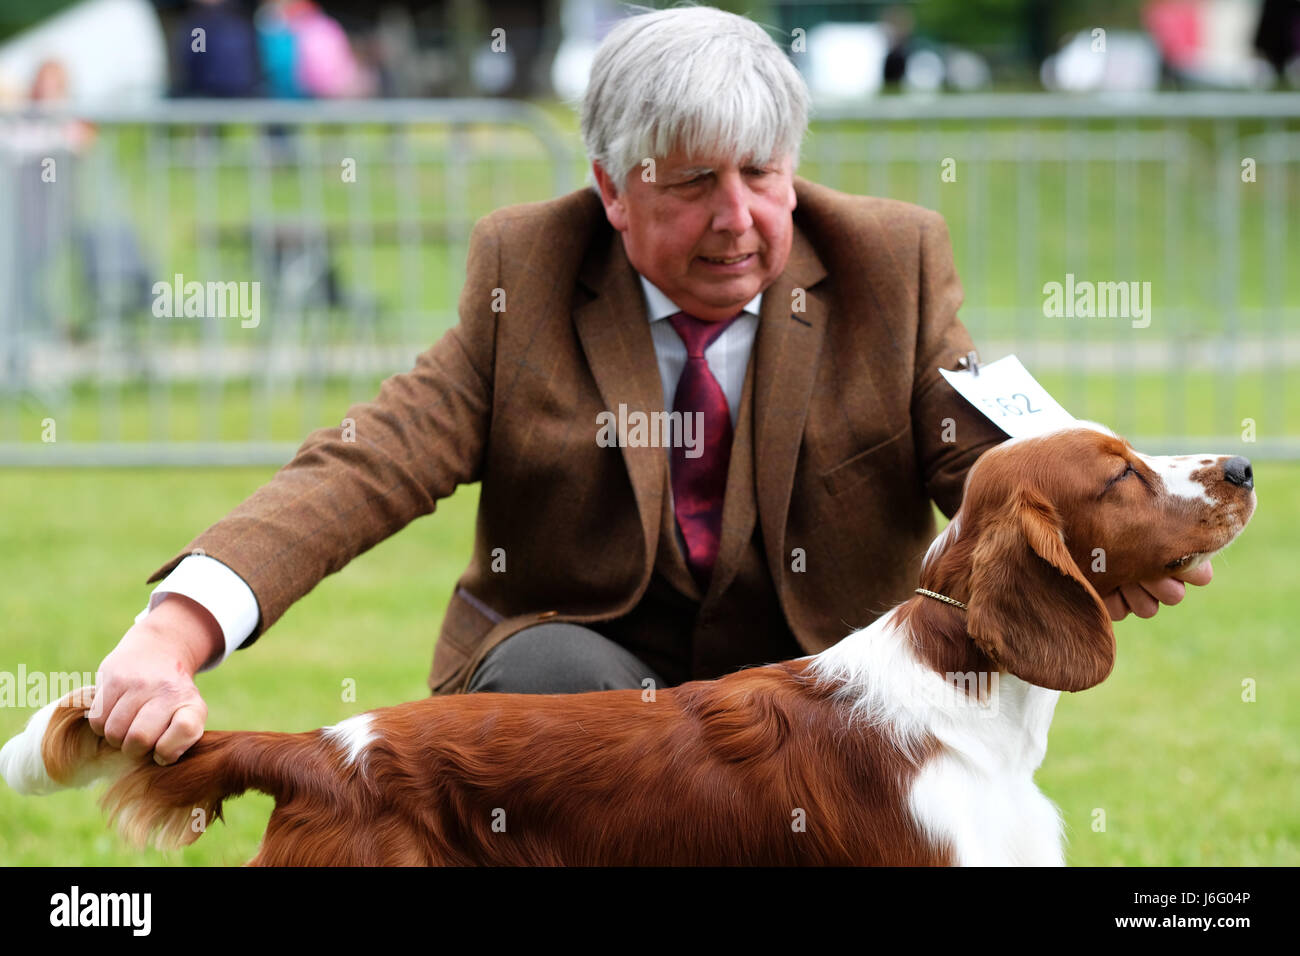 Royal Welsh Spring Festival, Builth Wells, Powys, Wales - May 2017 - A competitor in the dog show arena exhibits his Welsh Spring Spaniel dog at the Royal Welsh Spring Festival. This contest feeds into Crufts. Photo Steven May / Alamy Live News Stock Photo